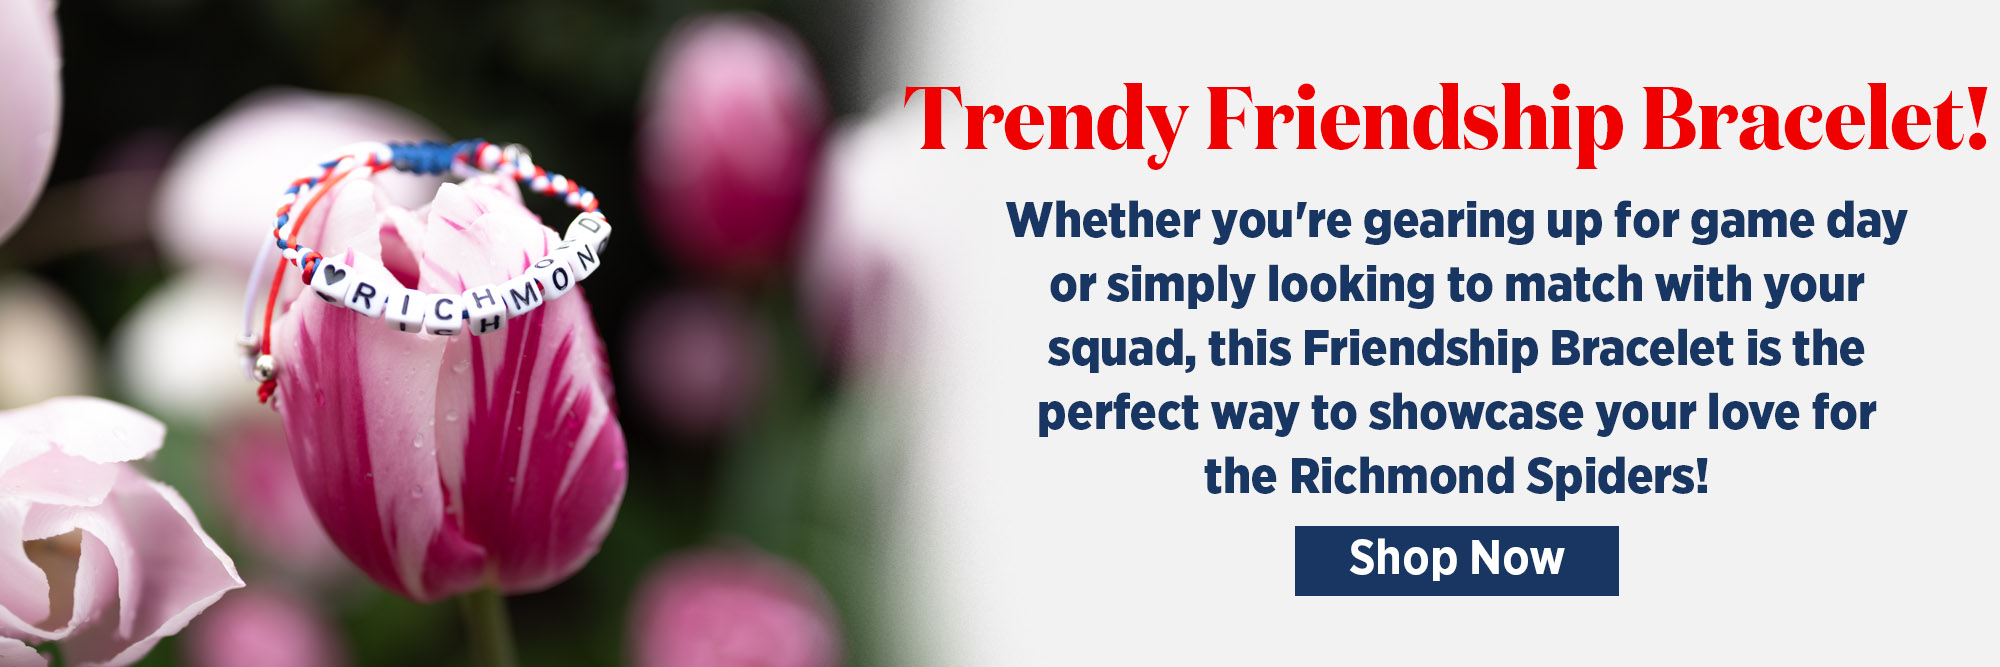 Whether you're gearing up for game day or simply looking to match with your squad, this Friendship Bracelet is the perfect way to showcase your love for the Spiders and strengthen the bond with your friends.